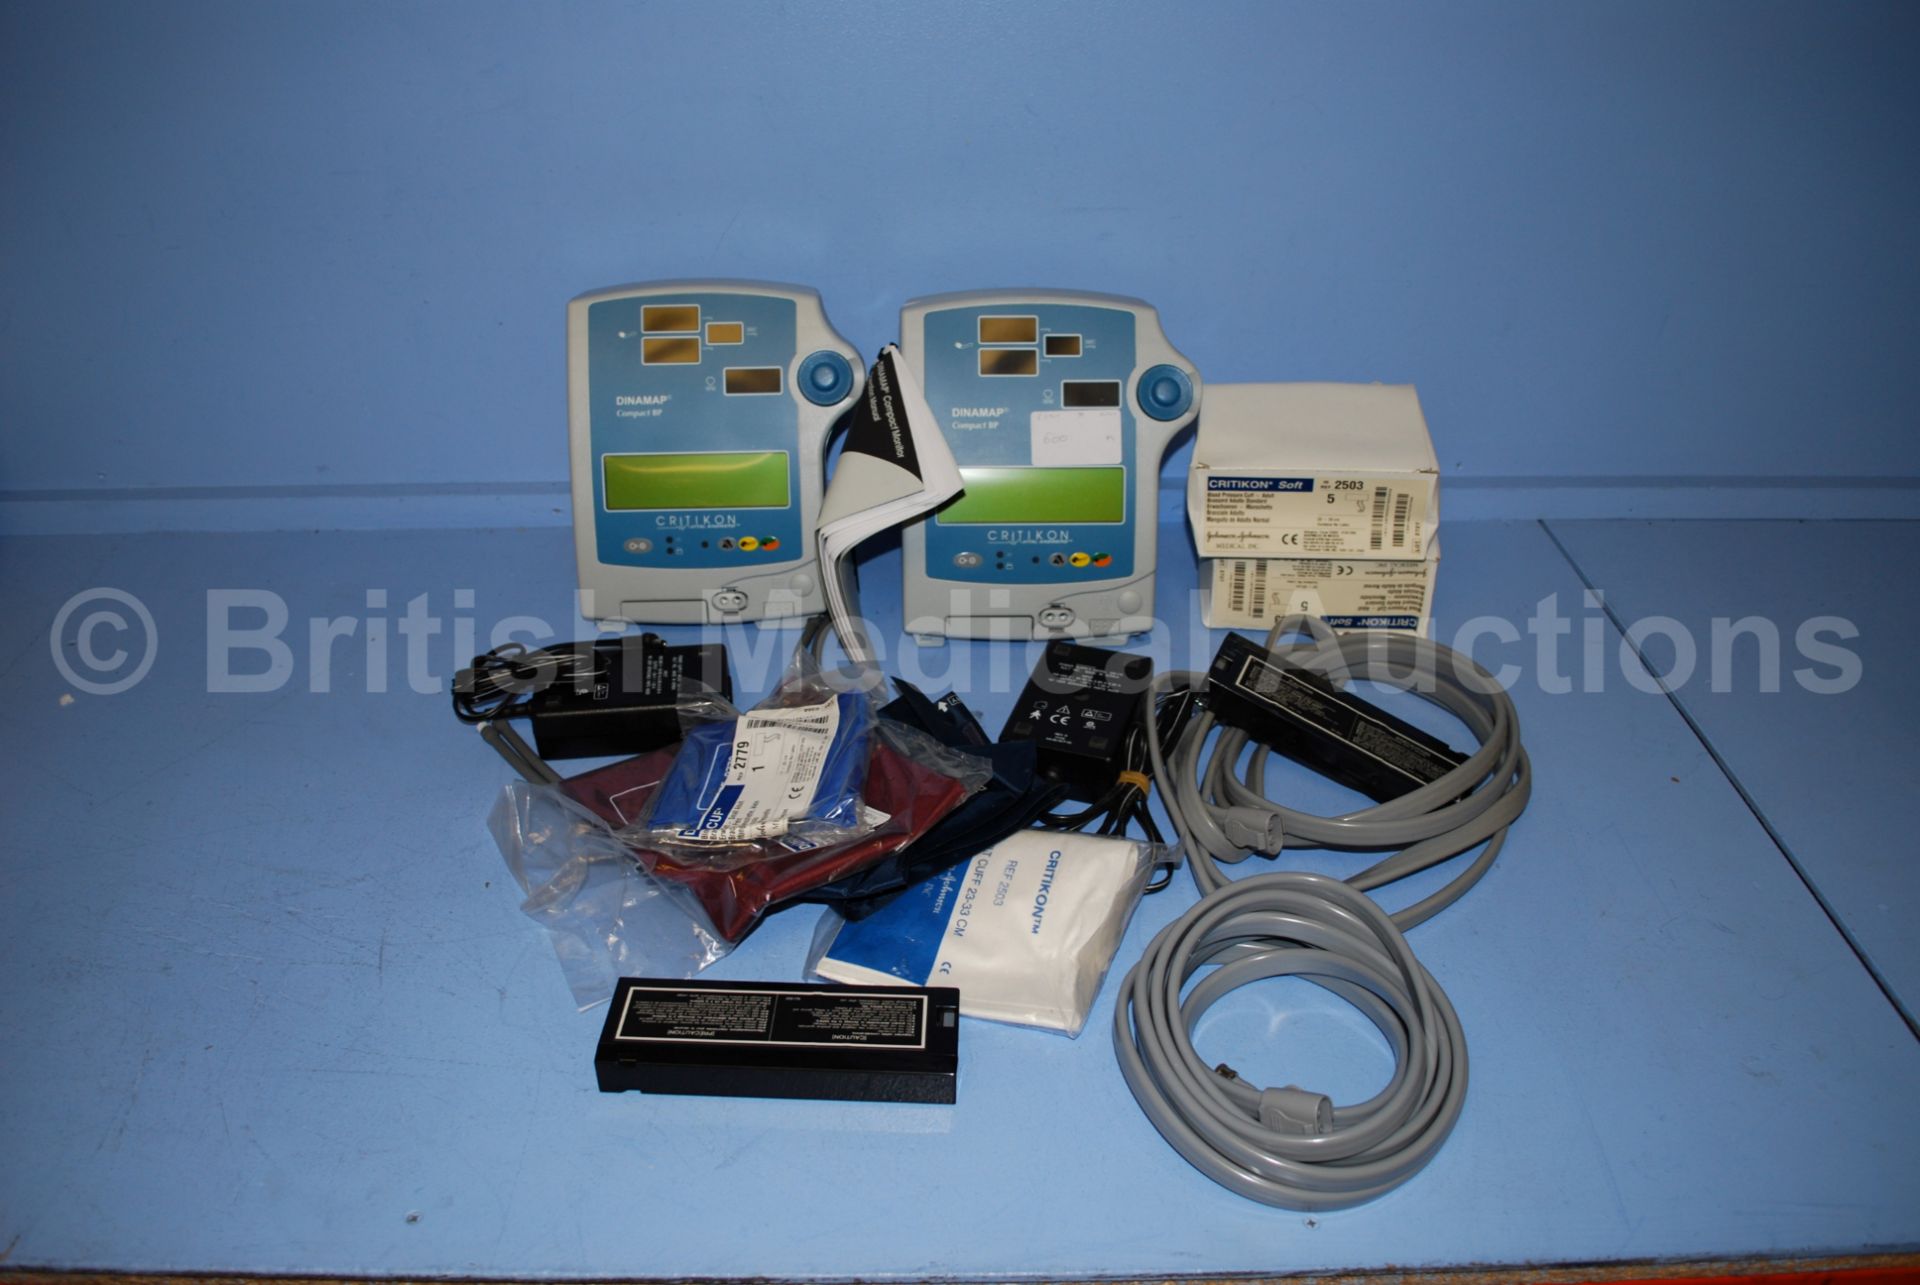 2 x Dinamap Compact BP Patient Monitors with Acce